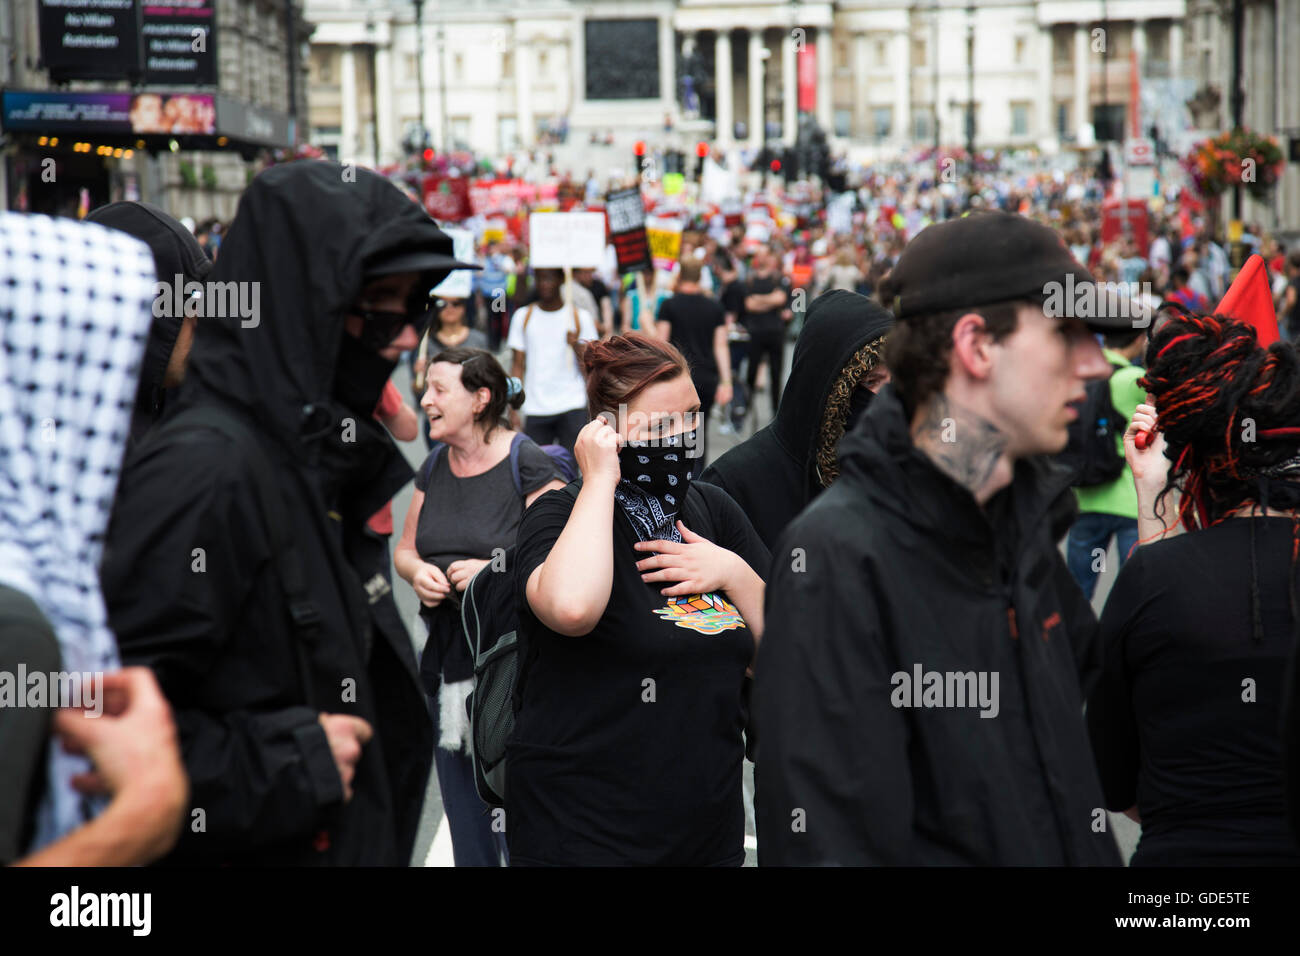 London, UK. 16th July, 2016. A small group of anarchists join the Peoples Assembly demonstration: No More Austerity - No To Racism - Tories Must Go, on Saturday July 16th in London, United Kingdom. Tens of thousands of people gathered to protest in a march through the capital protesting against the Conservative Party cuts. Almost 150 Councillors from across the country have signed a letter criticising the Government for funding cuts and and will be joining those marching in London. Credit:  Michael Kemp/Alamy Live News Stock Photo